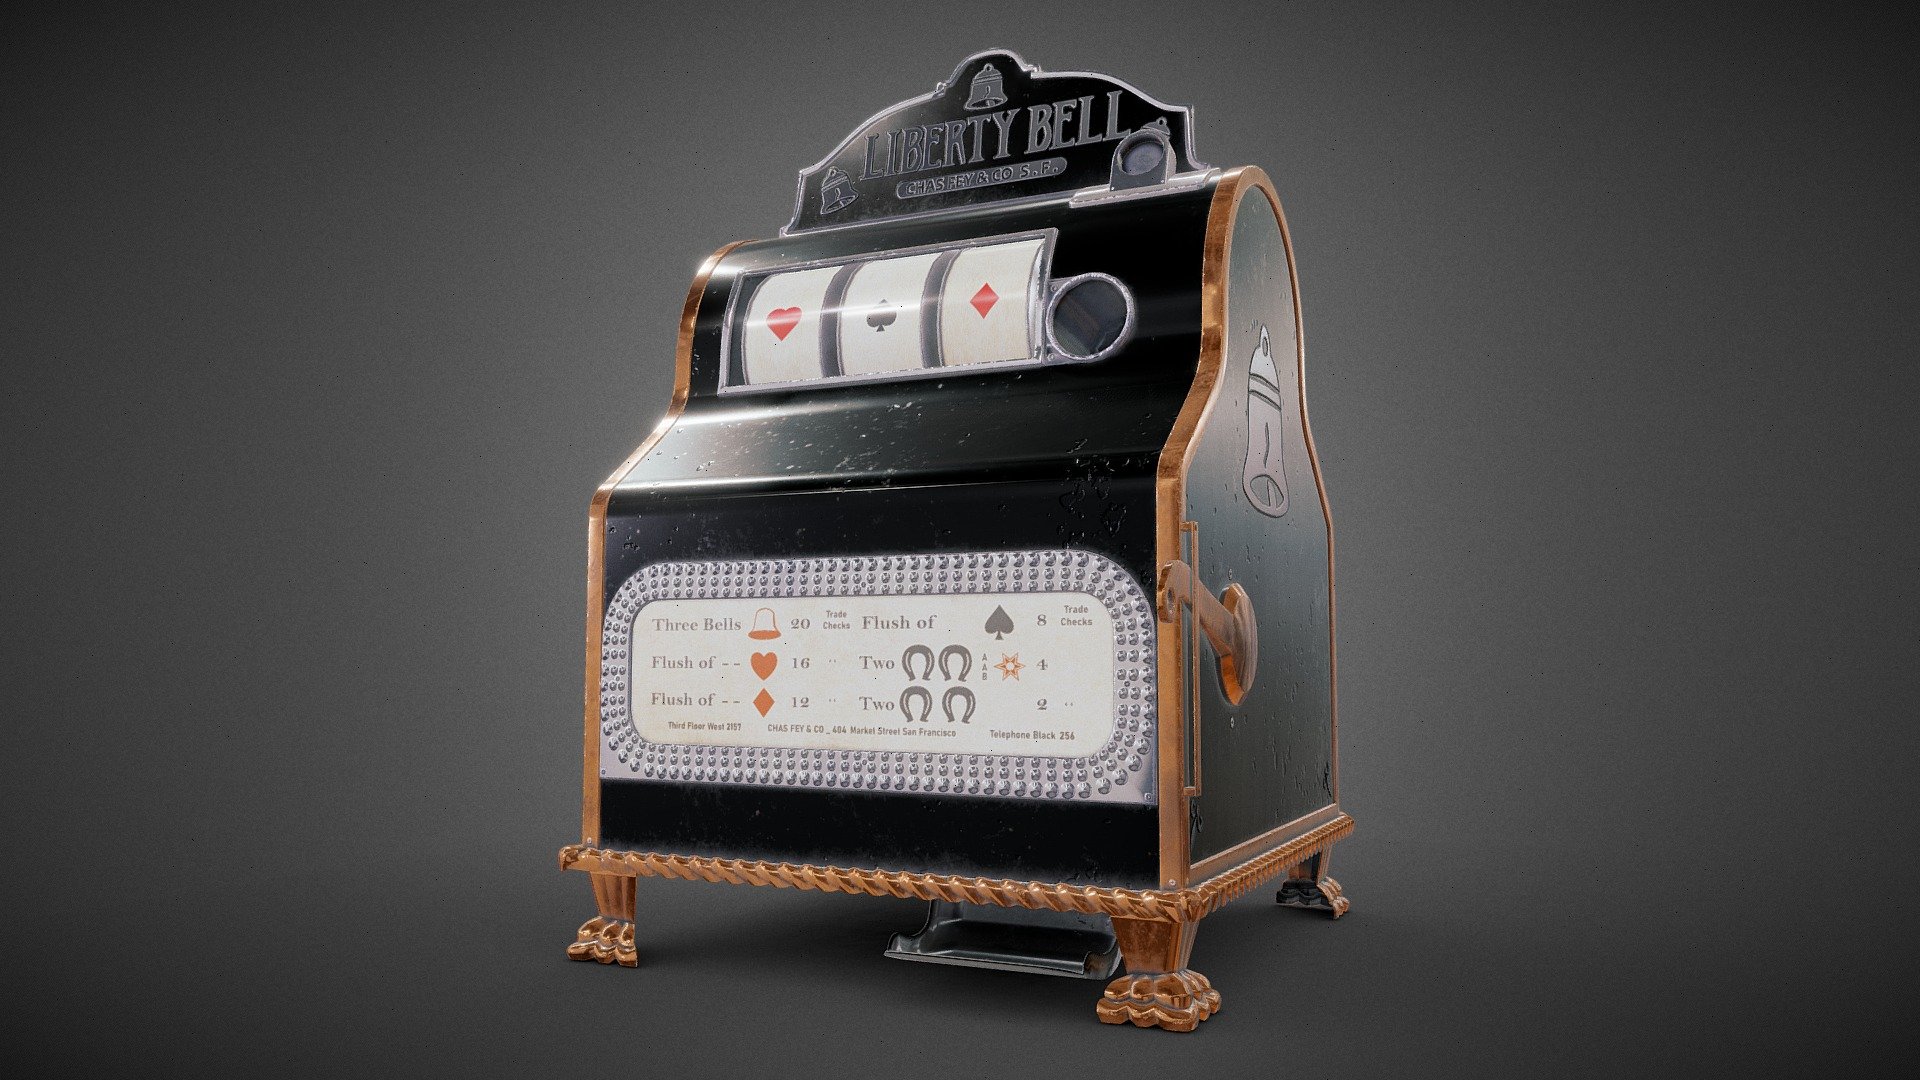 Liberty Bell 1898
Games of Chance: Gambling Devices of the Mechanical Age - Slot machine - Buy Royalty Free 3D model by Mehrnaz (@mehrnaz_a) 3d model